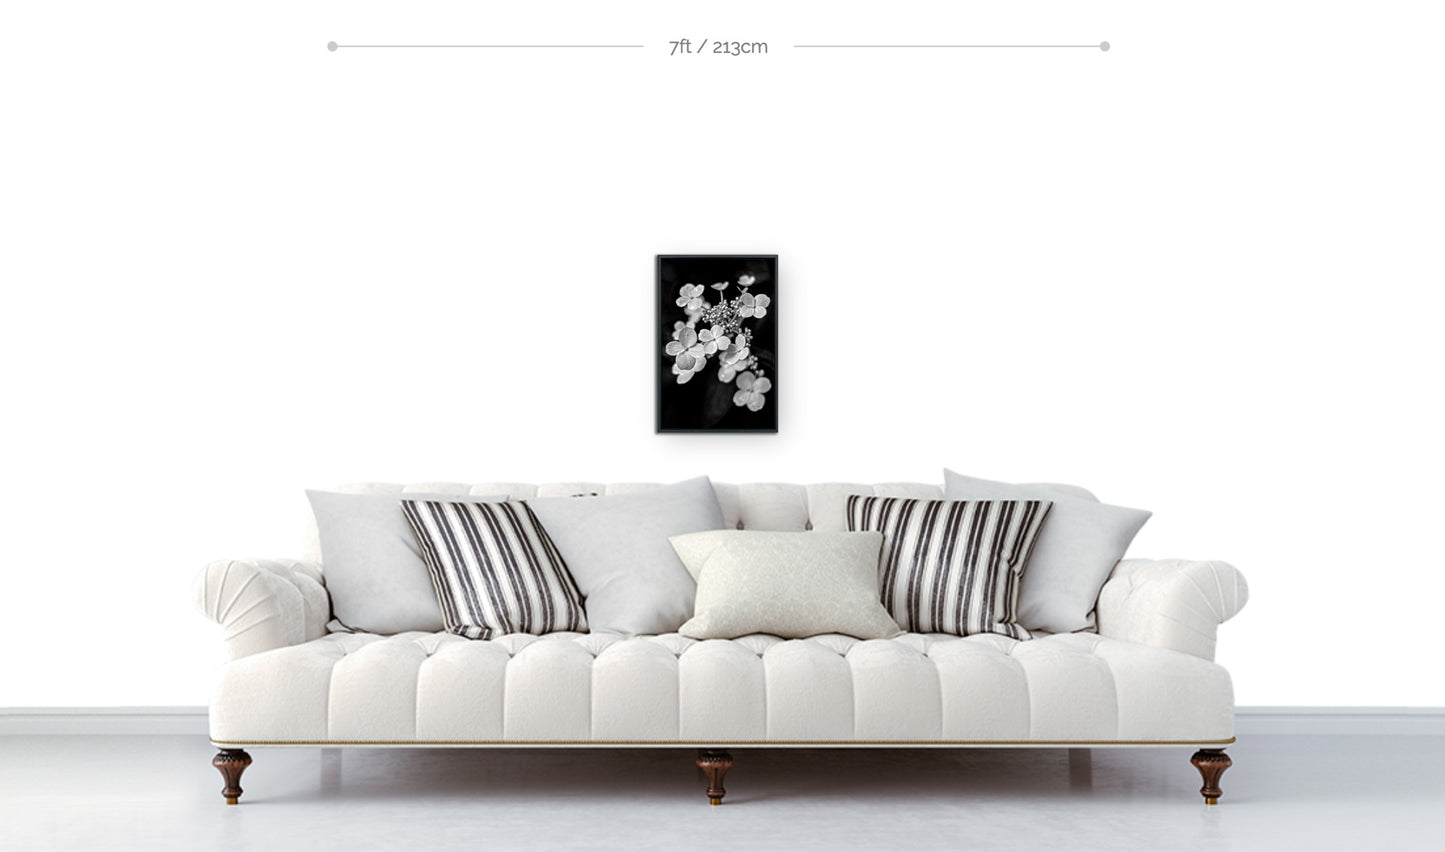 Framed floral wall decor 18x12 black and white metal print macro photograph of tiny white flowers displayed hanging above sofa